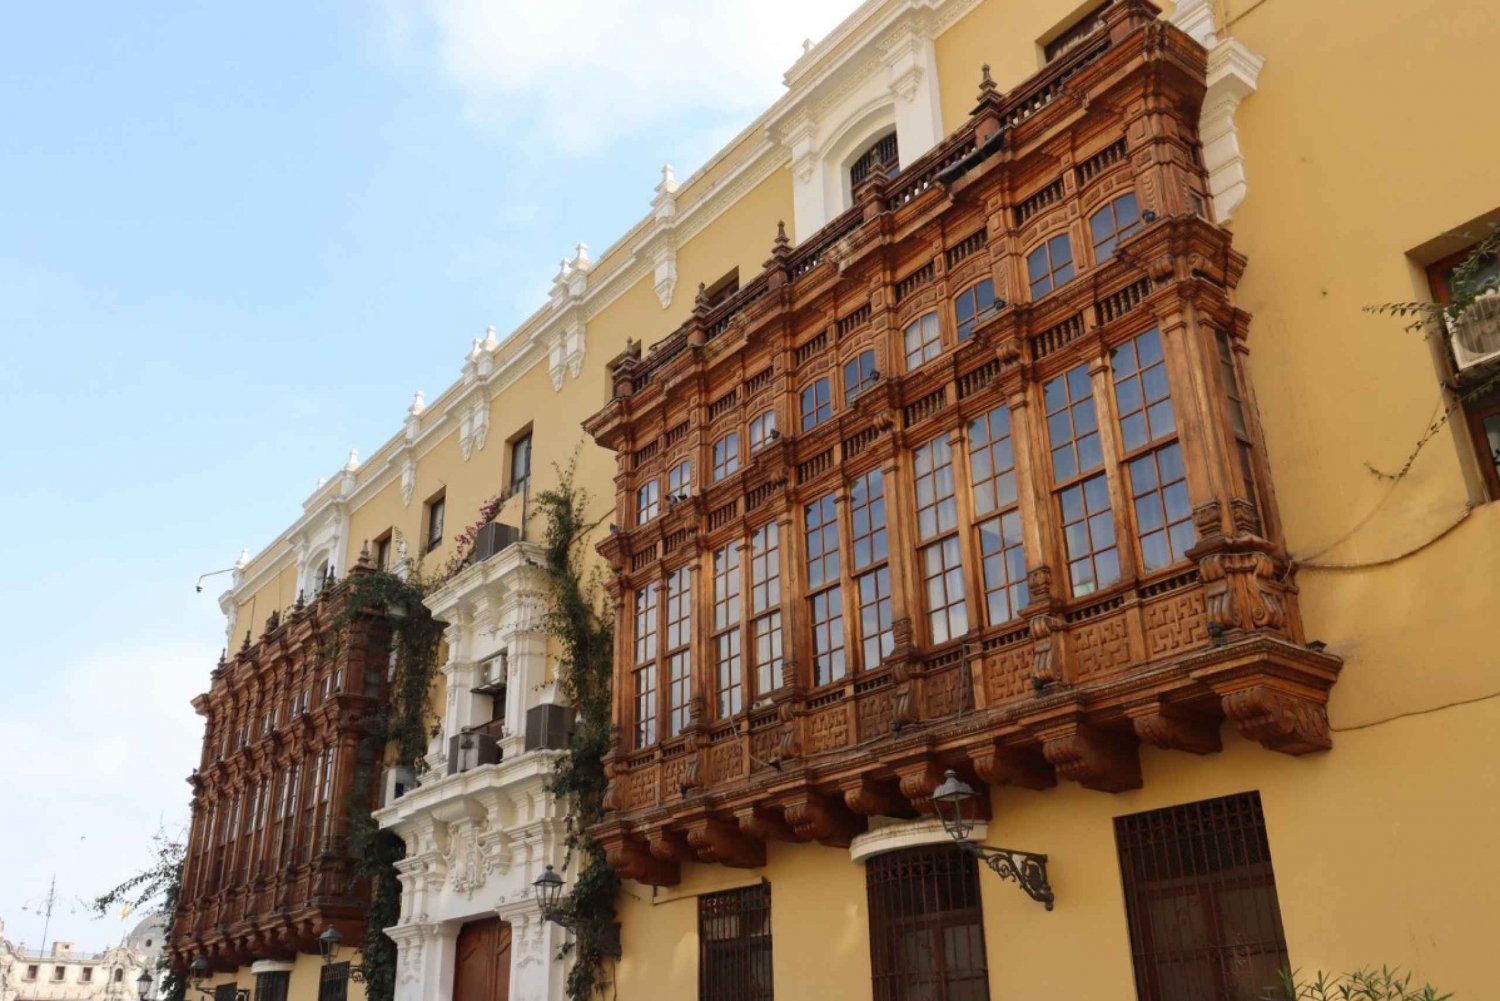 From Lima: City Tour with Catacombs & Pachacamac Inka Ruins